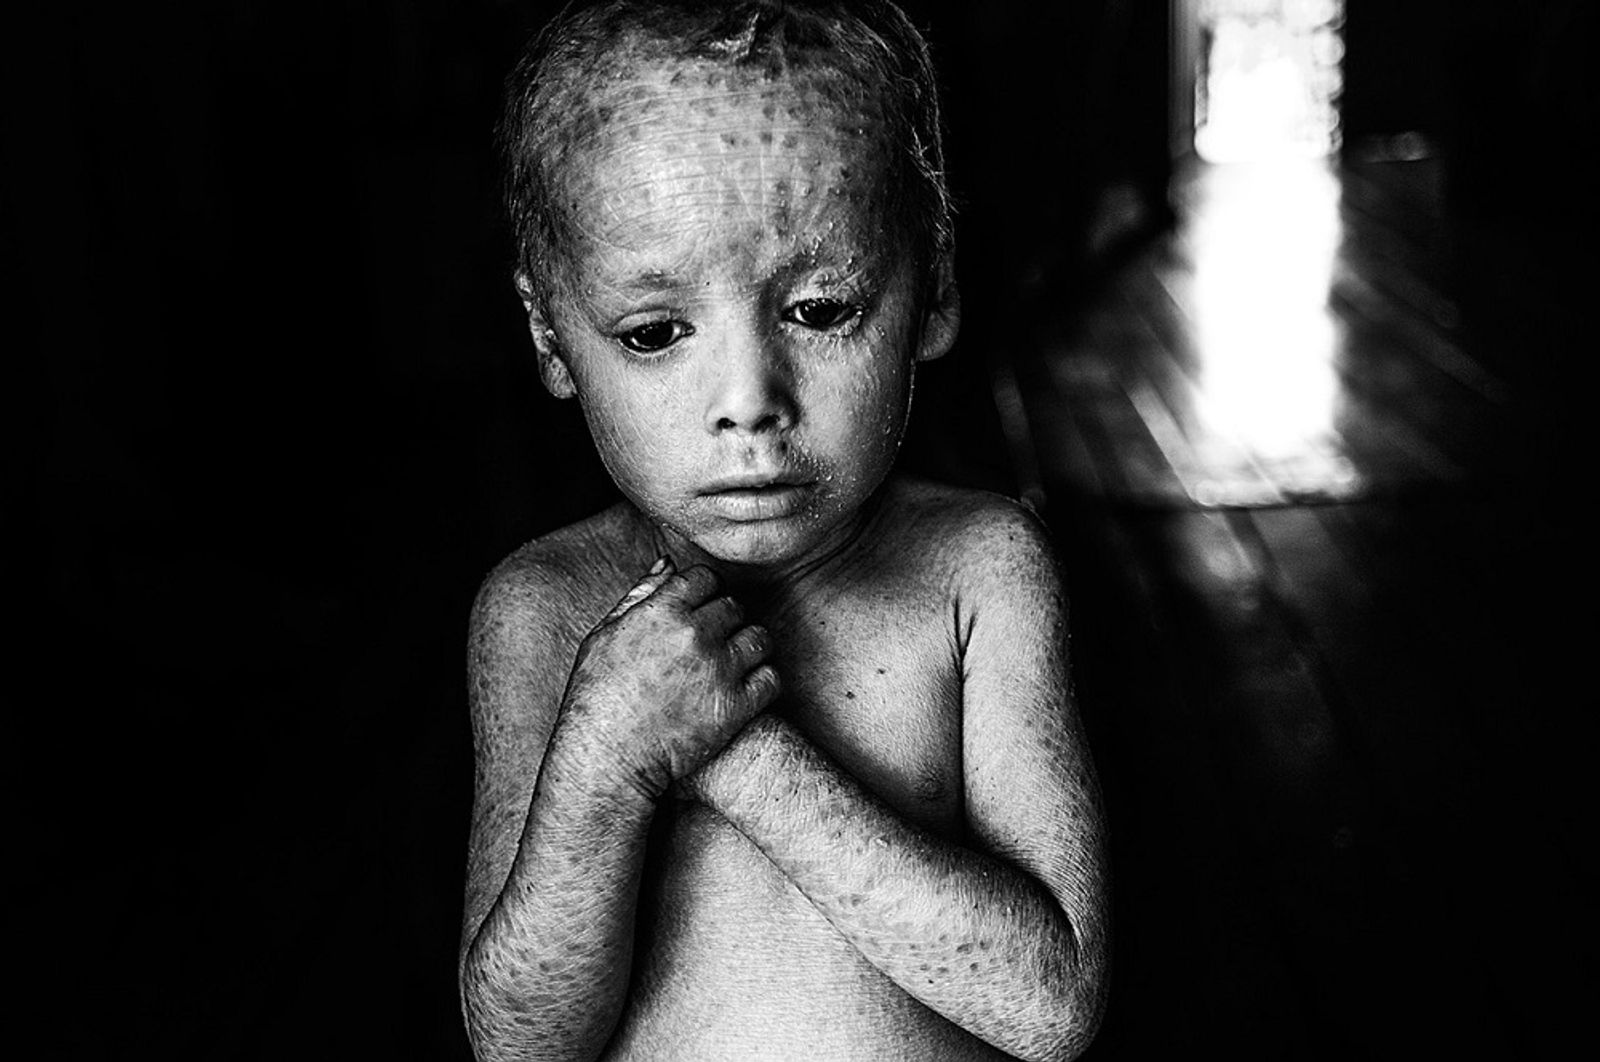 © Pablo Ernesto Piovano, from the series The Human Cost of Agrotoxins